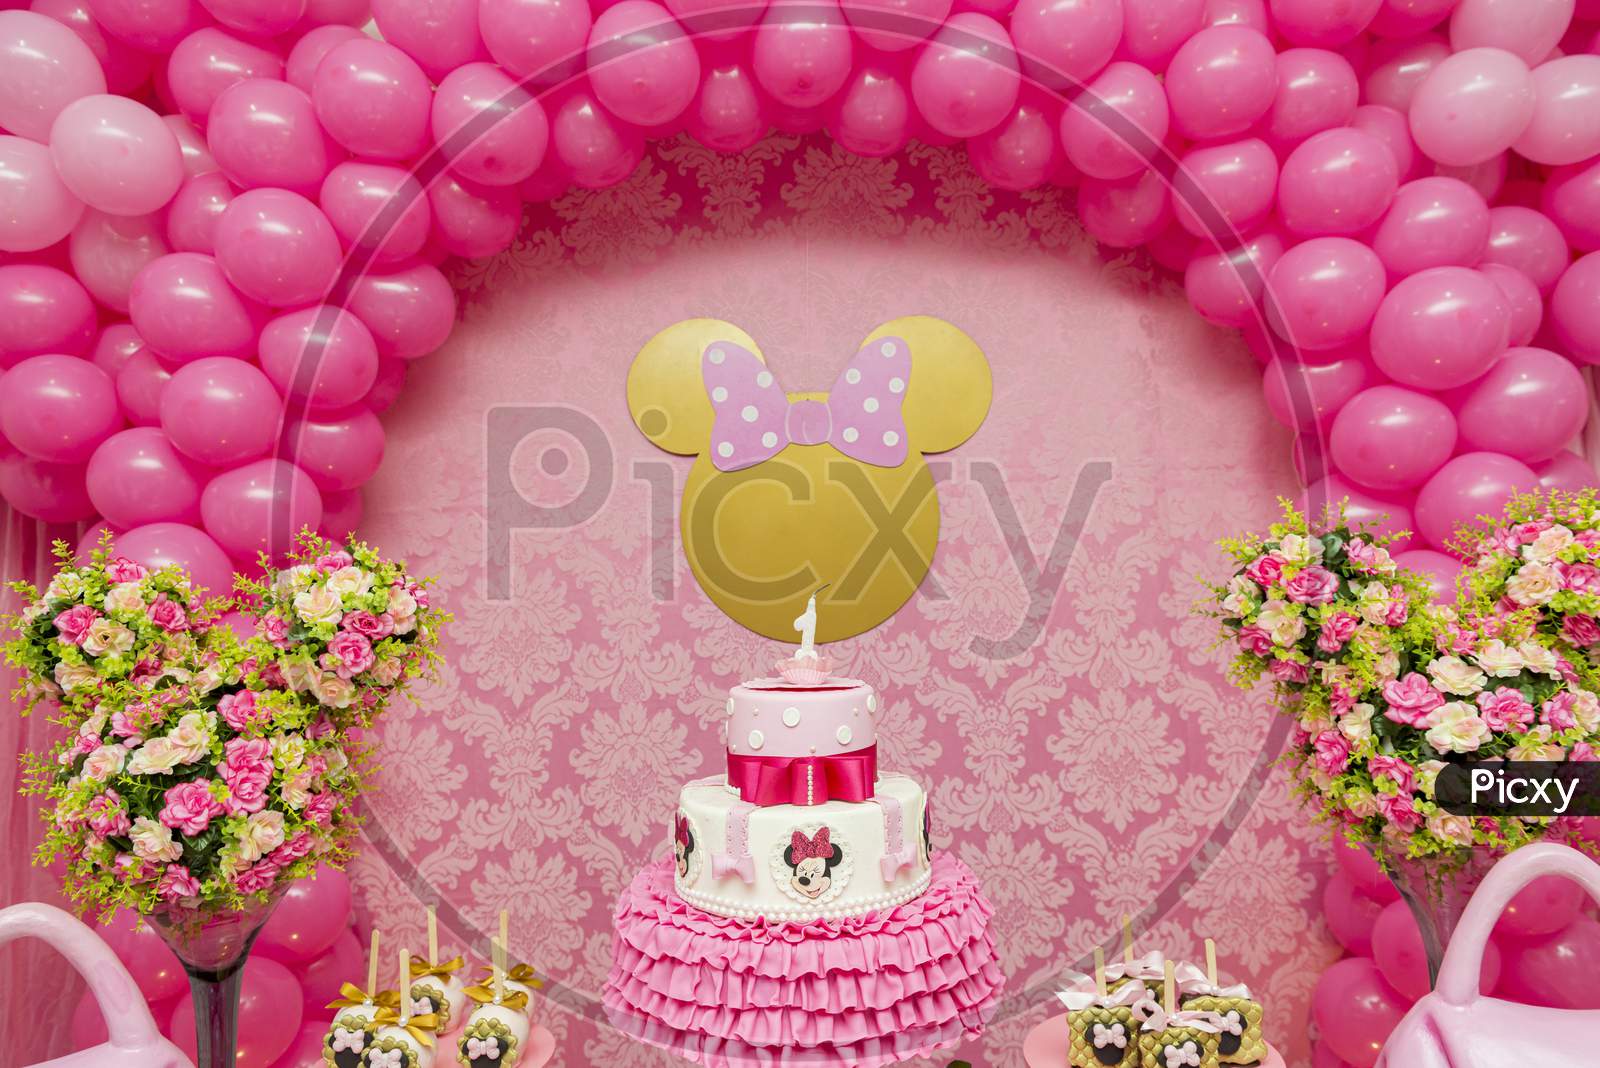 Sweet Table Decoration In Children'S Party With Minnie Mouse Theme.